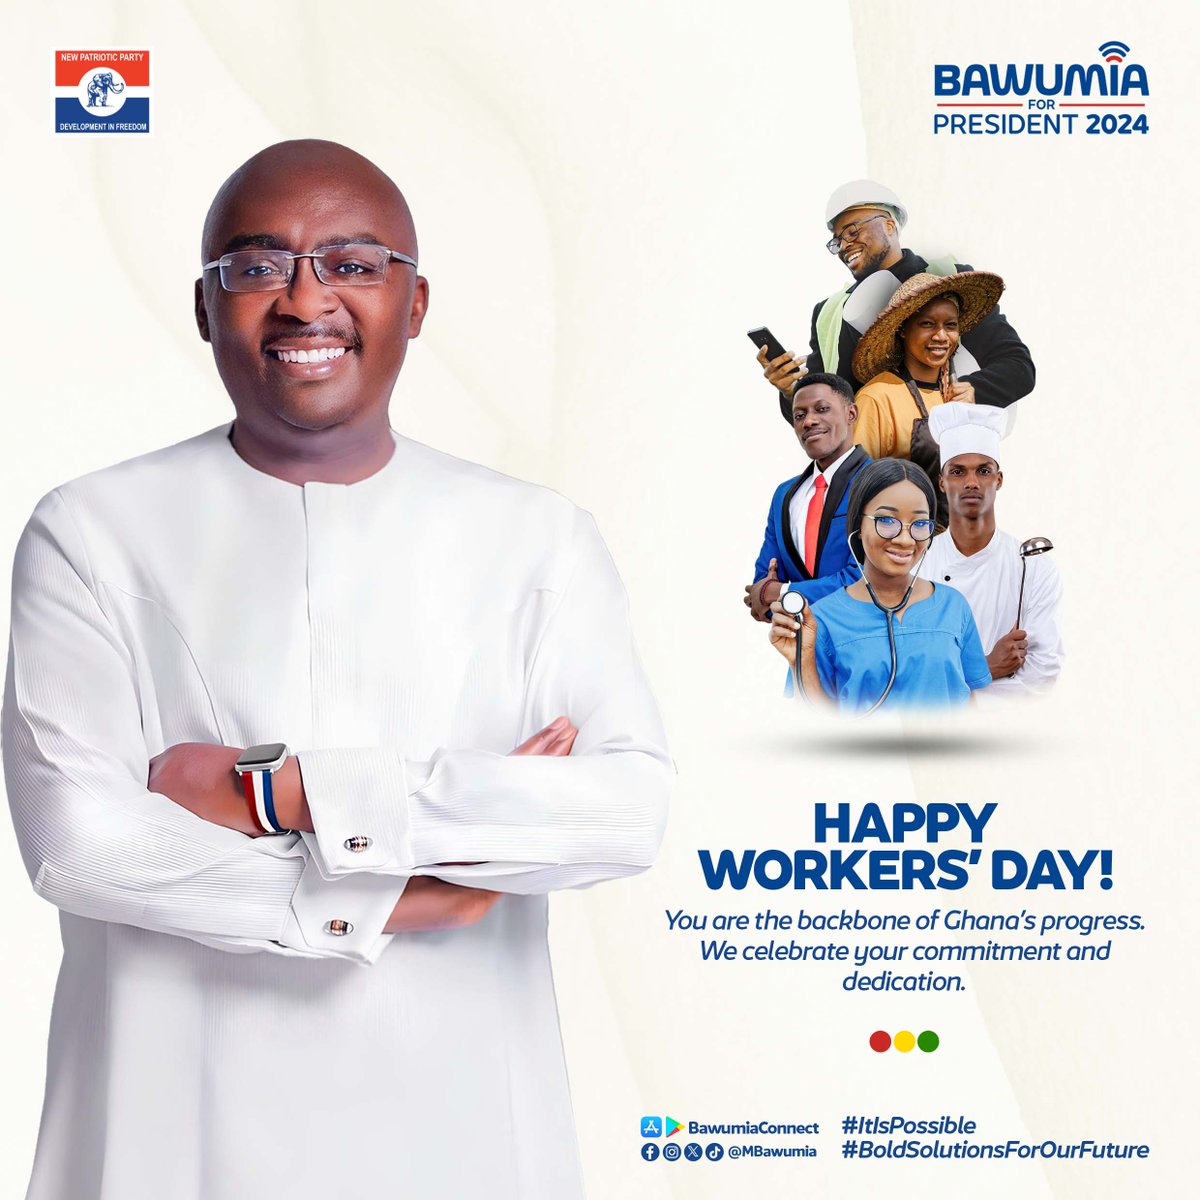 Happy workers' day to our gallant workers.